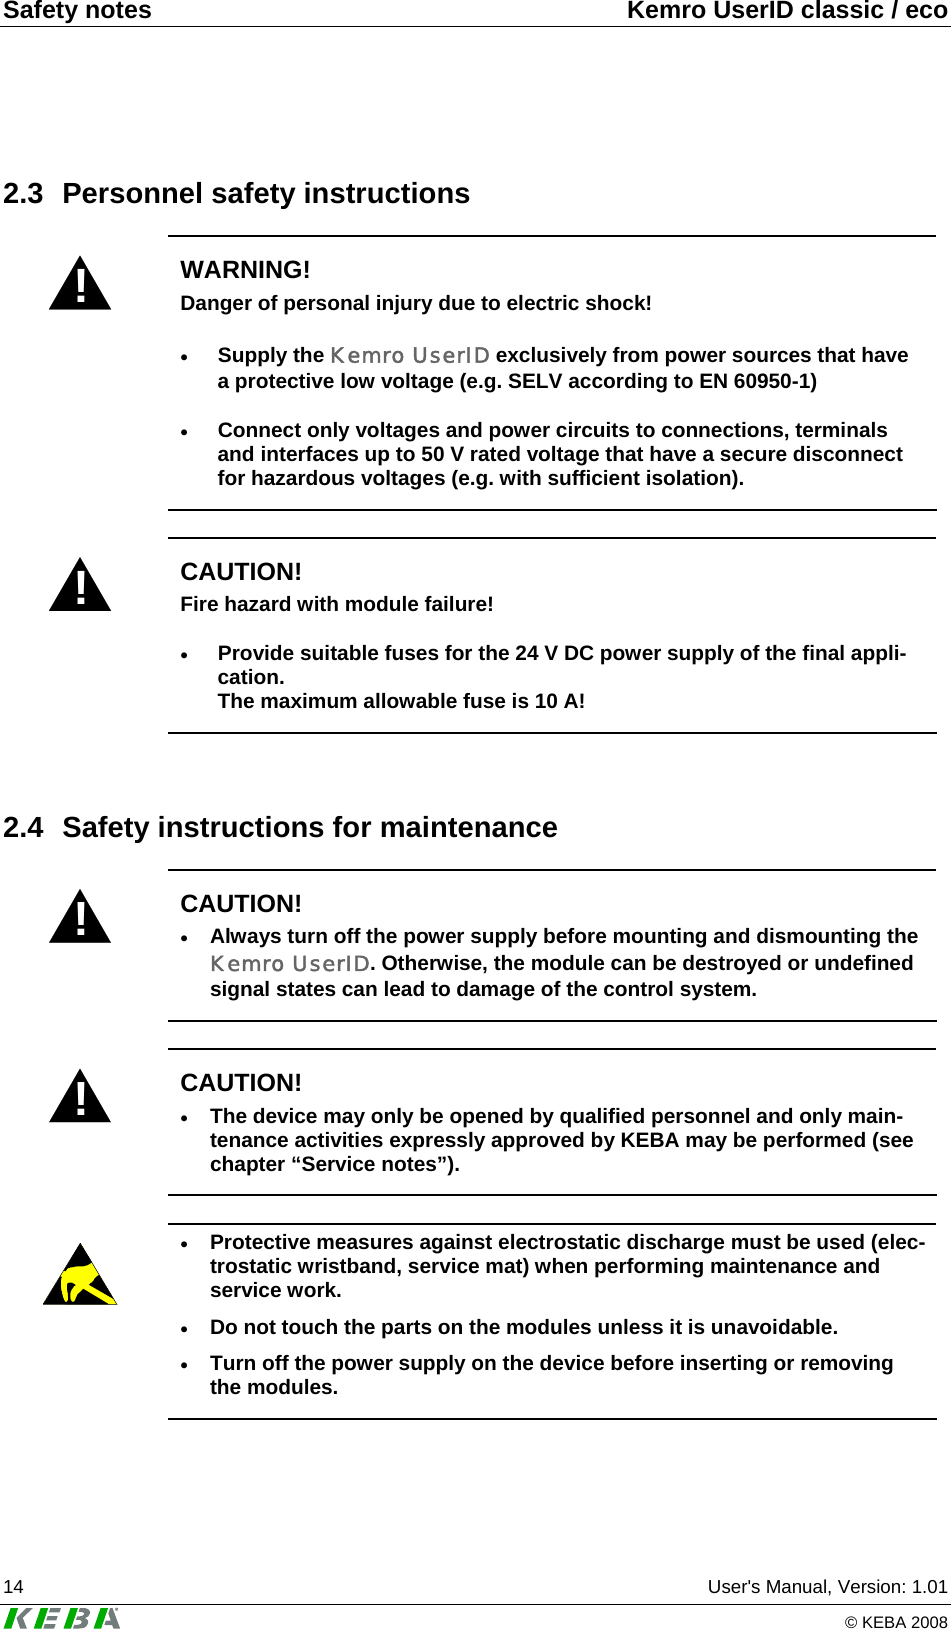 Safety notes  Kemro UserID classic / eco 14  User&apos;s Manual, Version: 1.01   © KEBA 2008 2.3 Personnel safety instructions ! WARNING! Danger of personal injury due to electric shock! • Supply the Kemro UserID exclusively from power sources that have a protective low voltage (e.g. SELV according to EN 60950-1) • Connect only voltages and power circuits to connections, terminals and interfaces up to 50 V rated voltage that have a secure disconnect for hazardous voltages (e.g. with sufficient isolation).  ! CAUTION! Fire hazard with module failure! • Provide suitable fuses for the 24 V DC power supply of the final appli-cation. The maximum allowable fuse is 10 A!  2.4  Safety instructions for maintenance ! CAUTION! • Always turn off the power supply before mounting and dismounting the Kemro UserID. Otherwise, the module can be destroyed or undefined signal states can lead to damage of the control system.  ! CAUTION! • The device may only be opened by qualified personnel and only main-tenance activities expressly approved by KEBA may be performed (see chapter “Service notes”).    • Protective measures against electrostatic discharge must be used (elec-trostatic wristband, service mat) when performing maintenance and service work. • Do not touch the parts on the modules unless it is unavoidable. • Turn off the power supply on the device before inserting or removing the modules.  